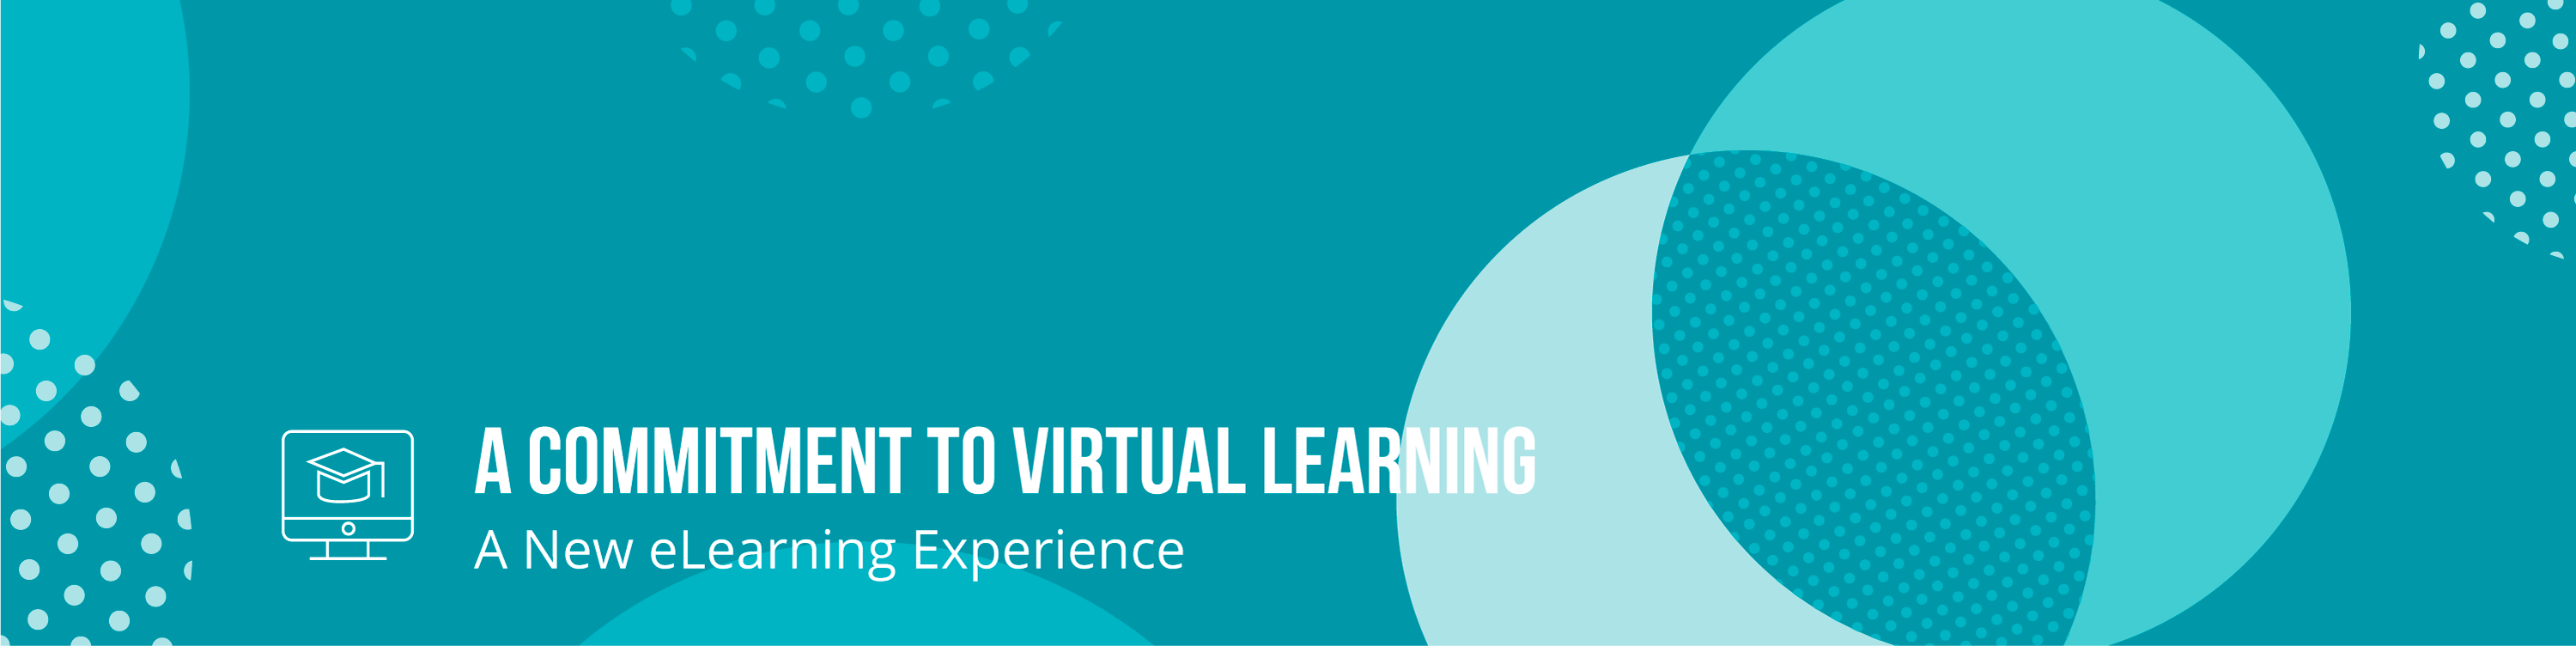 A Commitment to Virtual Learning